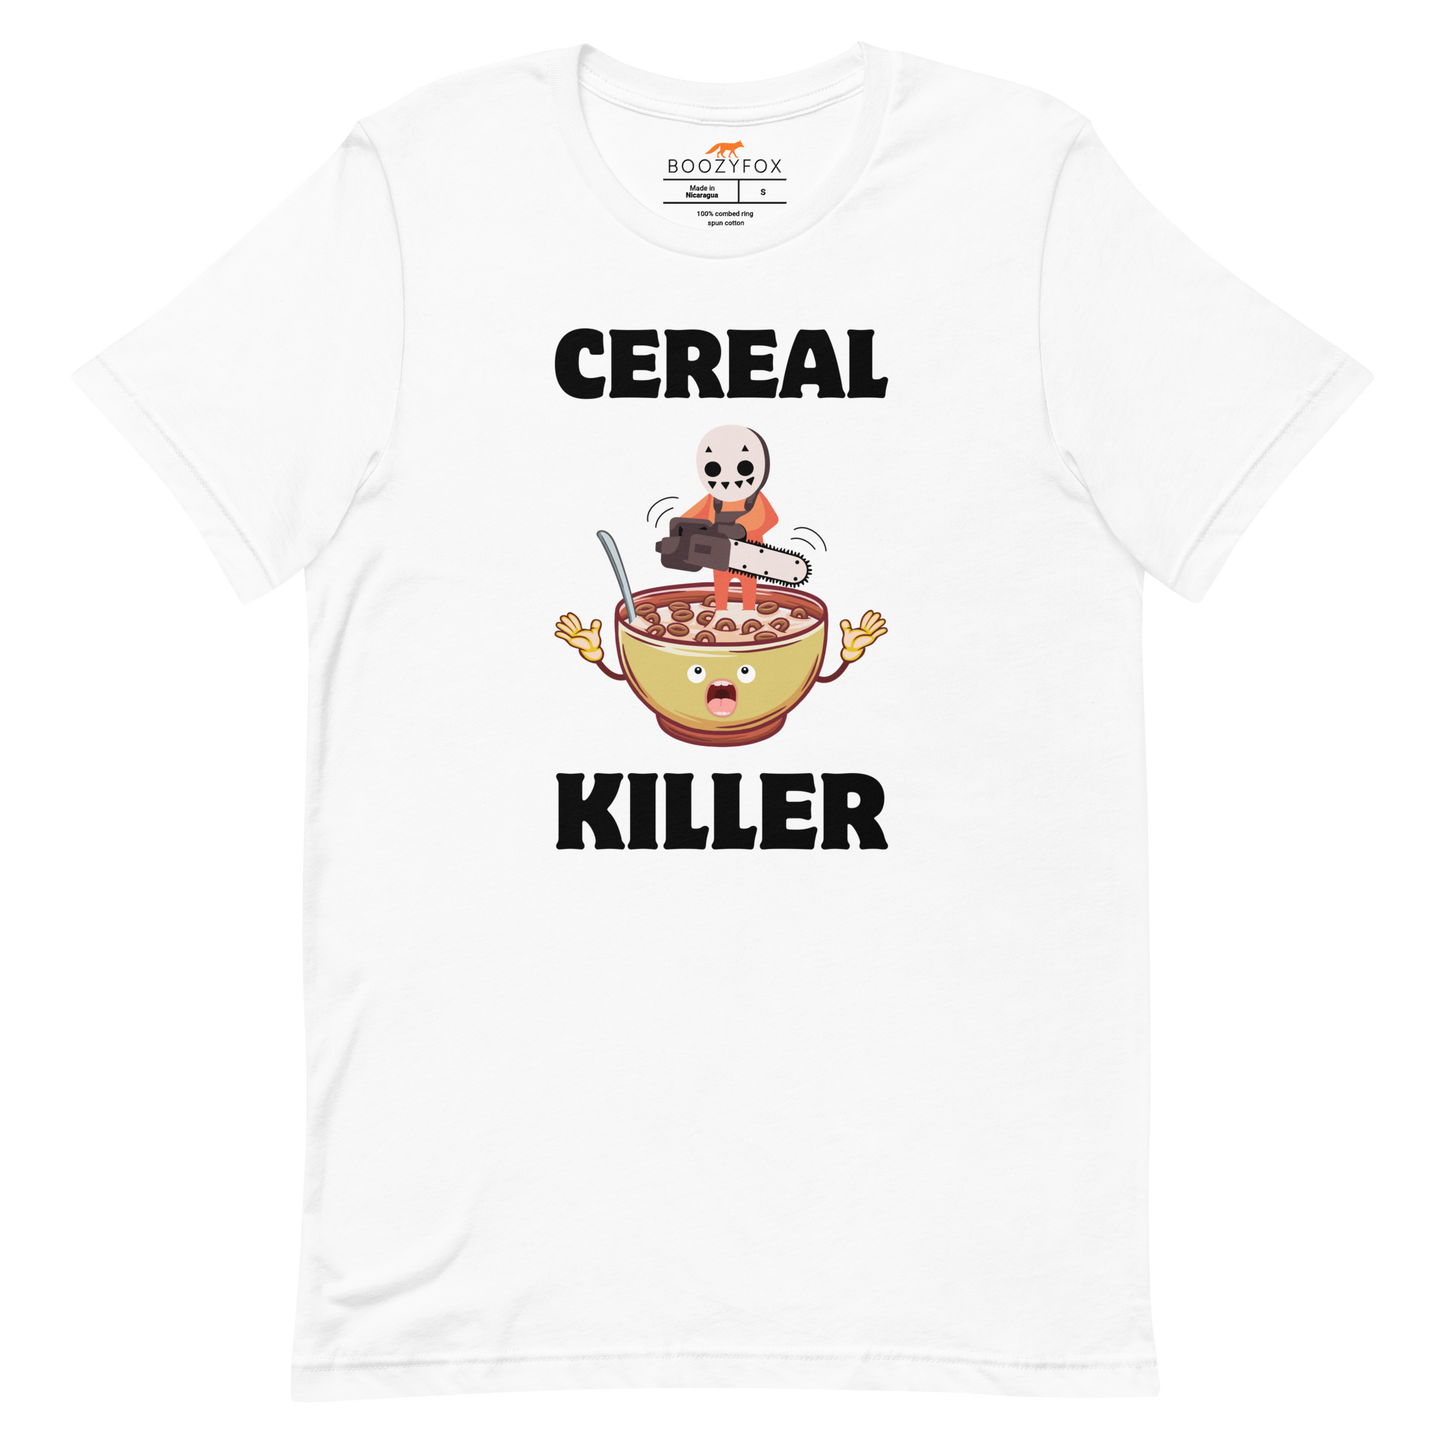 White Premium Cereal Killer Tee featuring a Cereal Killer graphic on the chest - Funny Graphic Tees - Boozy Fox